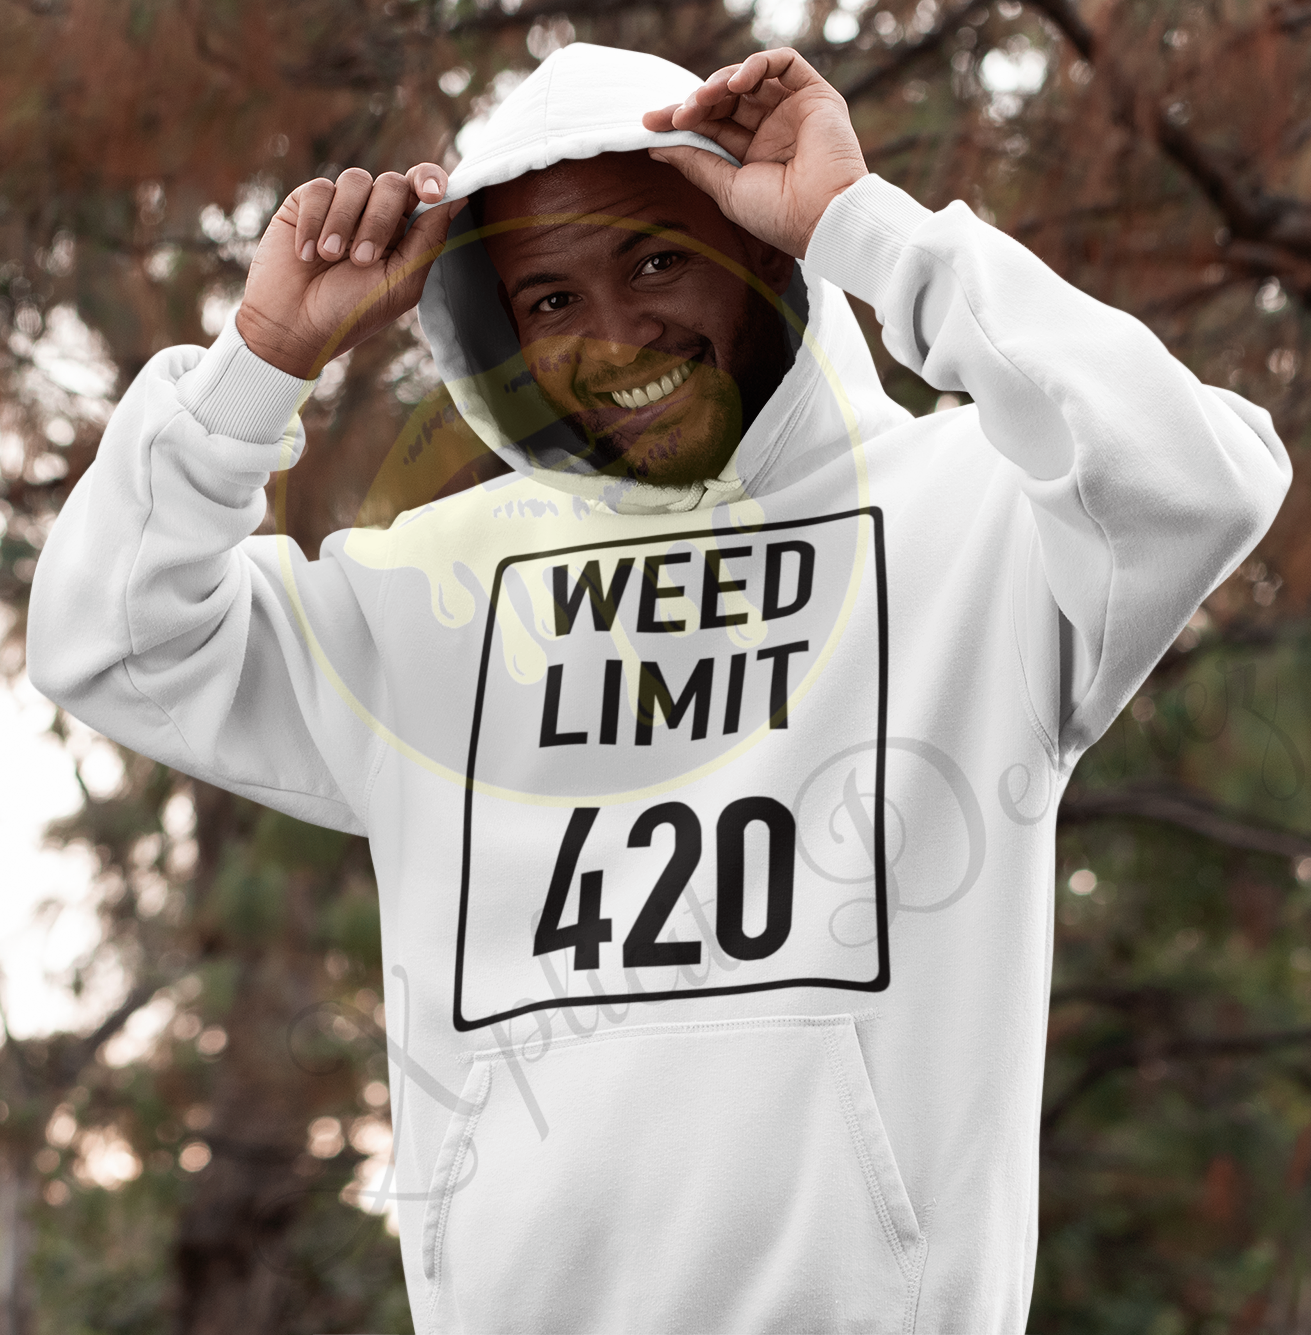 Weed limit